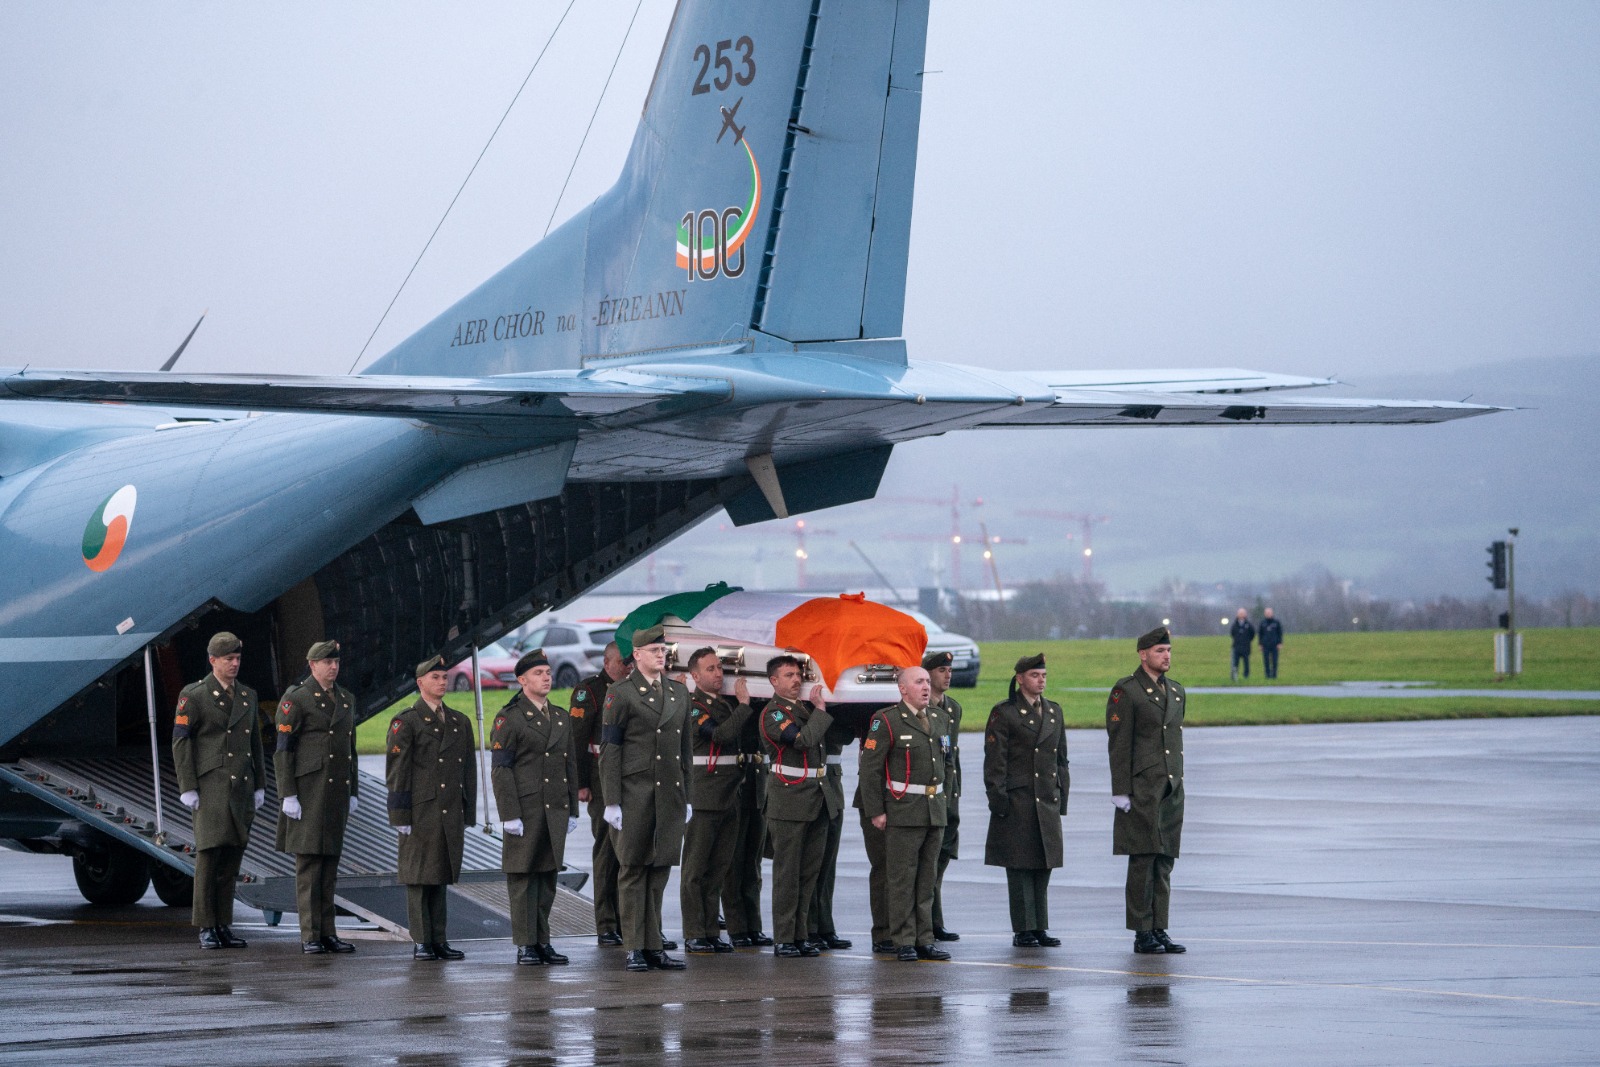 The remains of Private Seán Rooney are carried off the plane at Casement Aerodrome in Dublin, 19-12-2022. Image: Tom Douglas/Newstalk